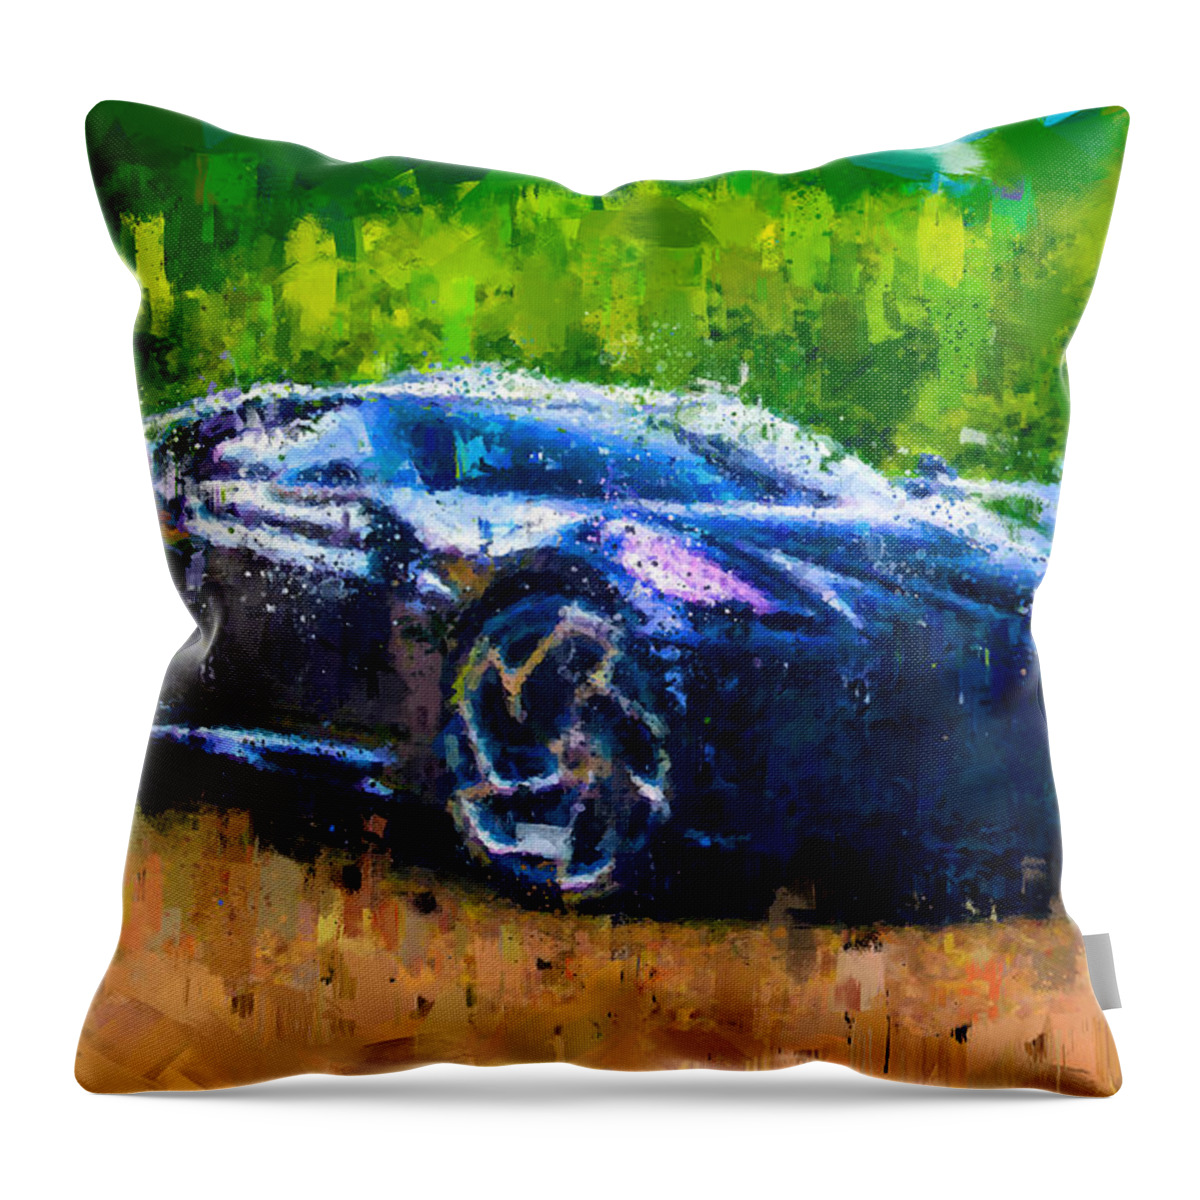 Impressionism Throw Pillow featuring the painting Bugatti La Voiture Noire by Vart Studio